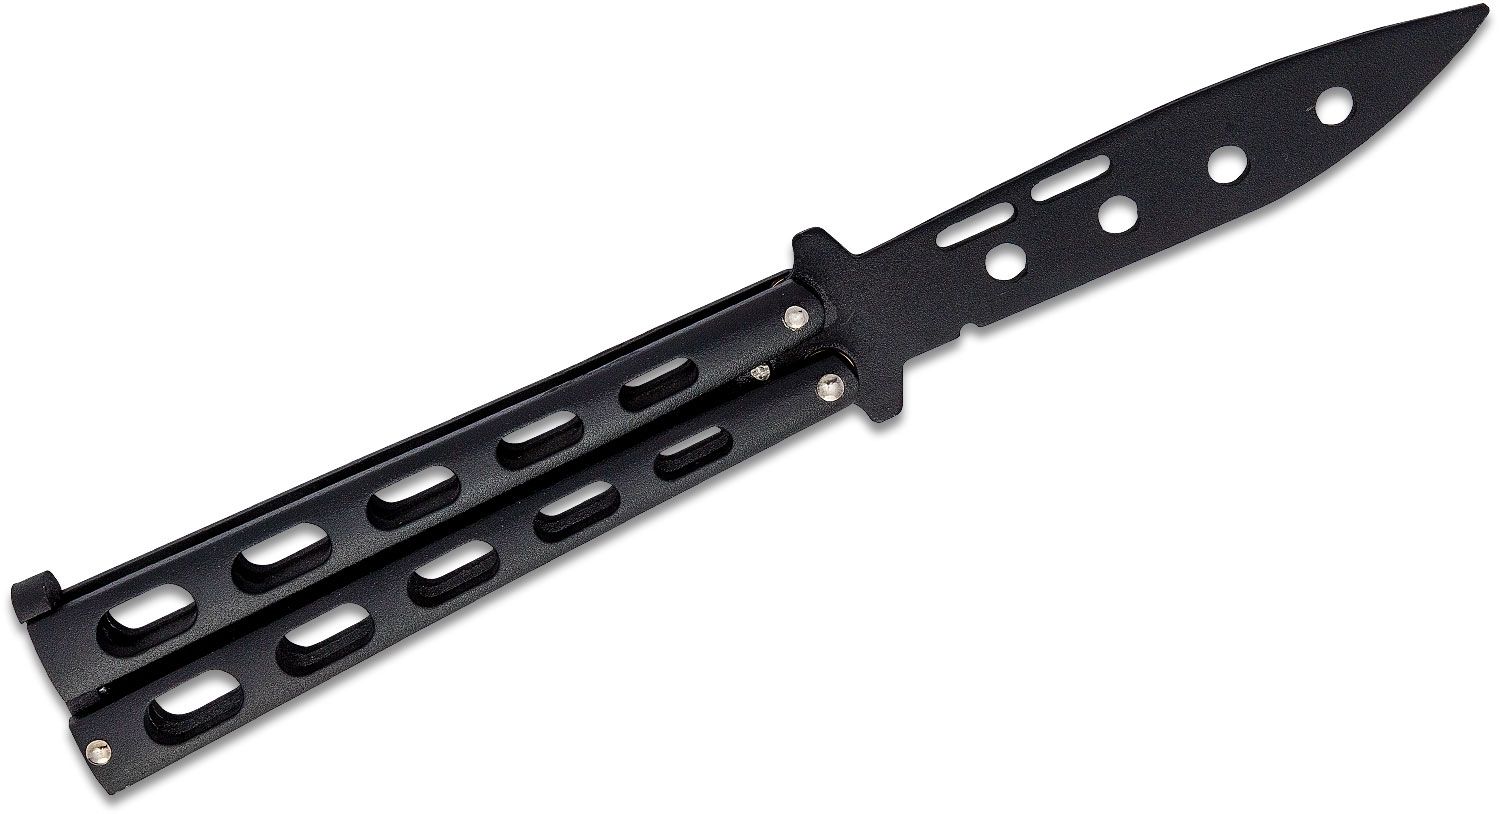 Amarey Butterfly Knife Trainer with Unsharpened Blade